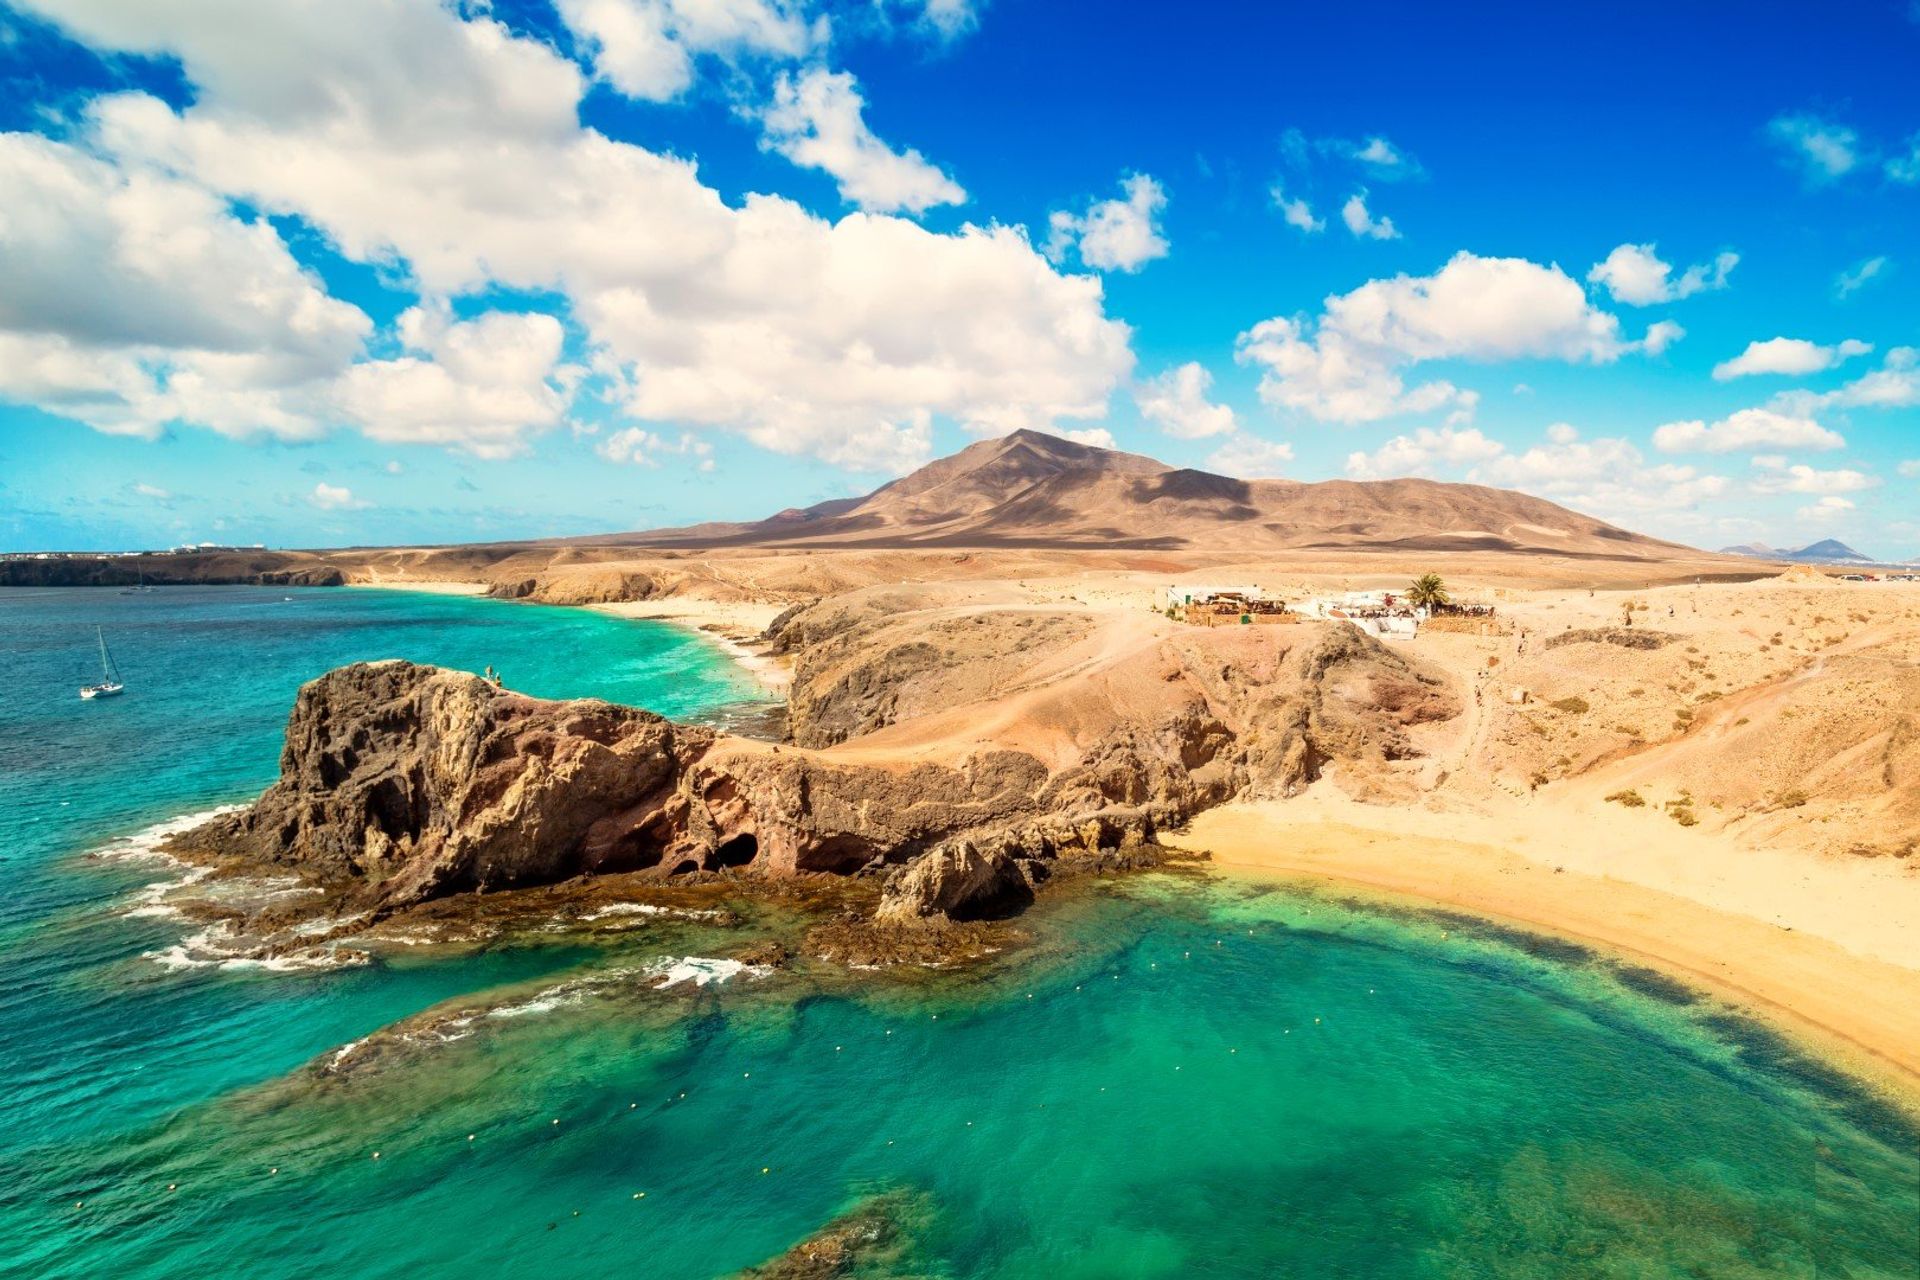 Find your own little slice of coastal heaven on stunning Papagayo beach